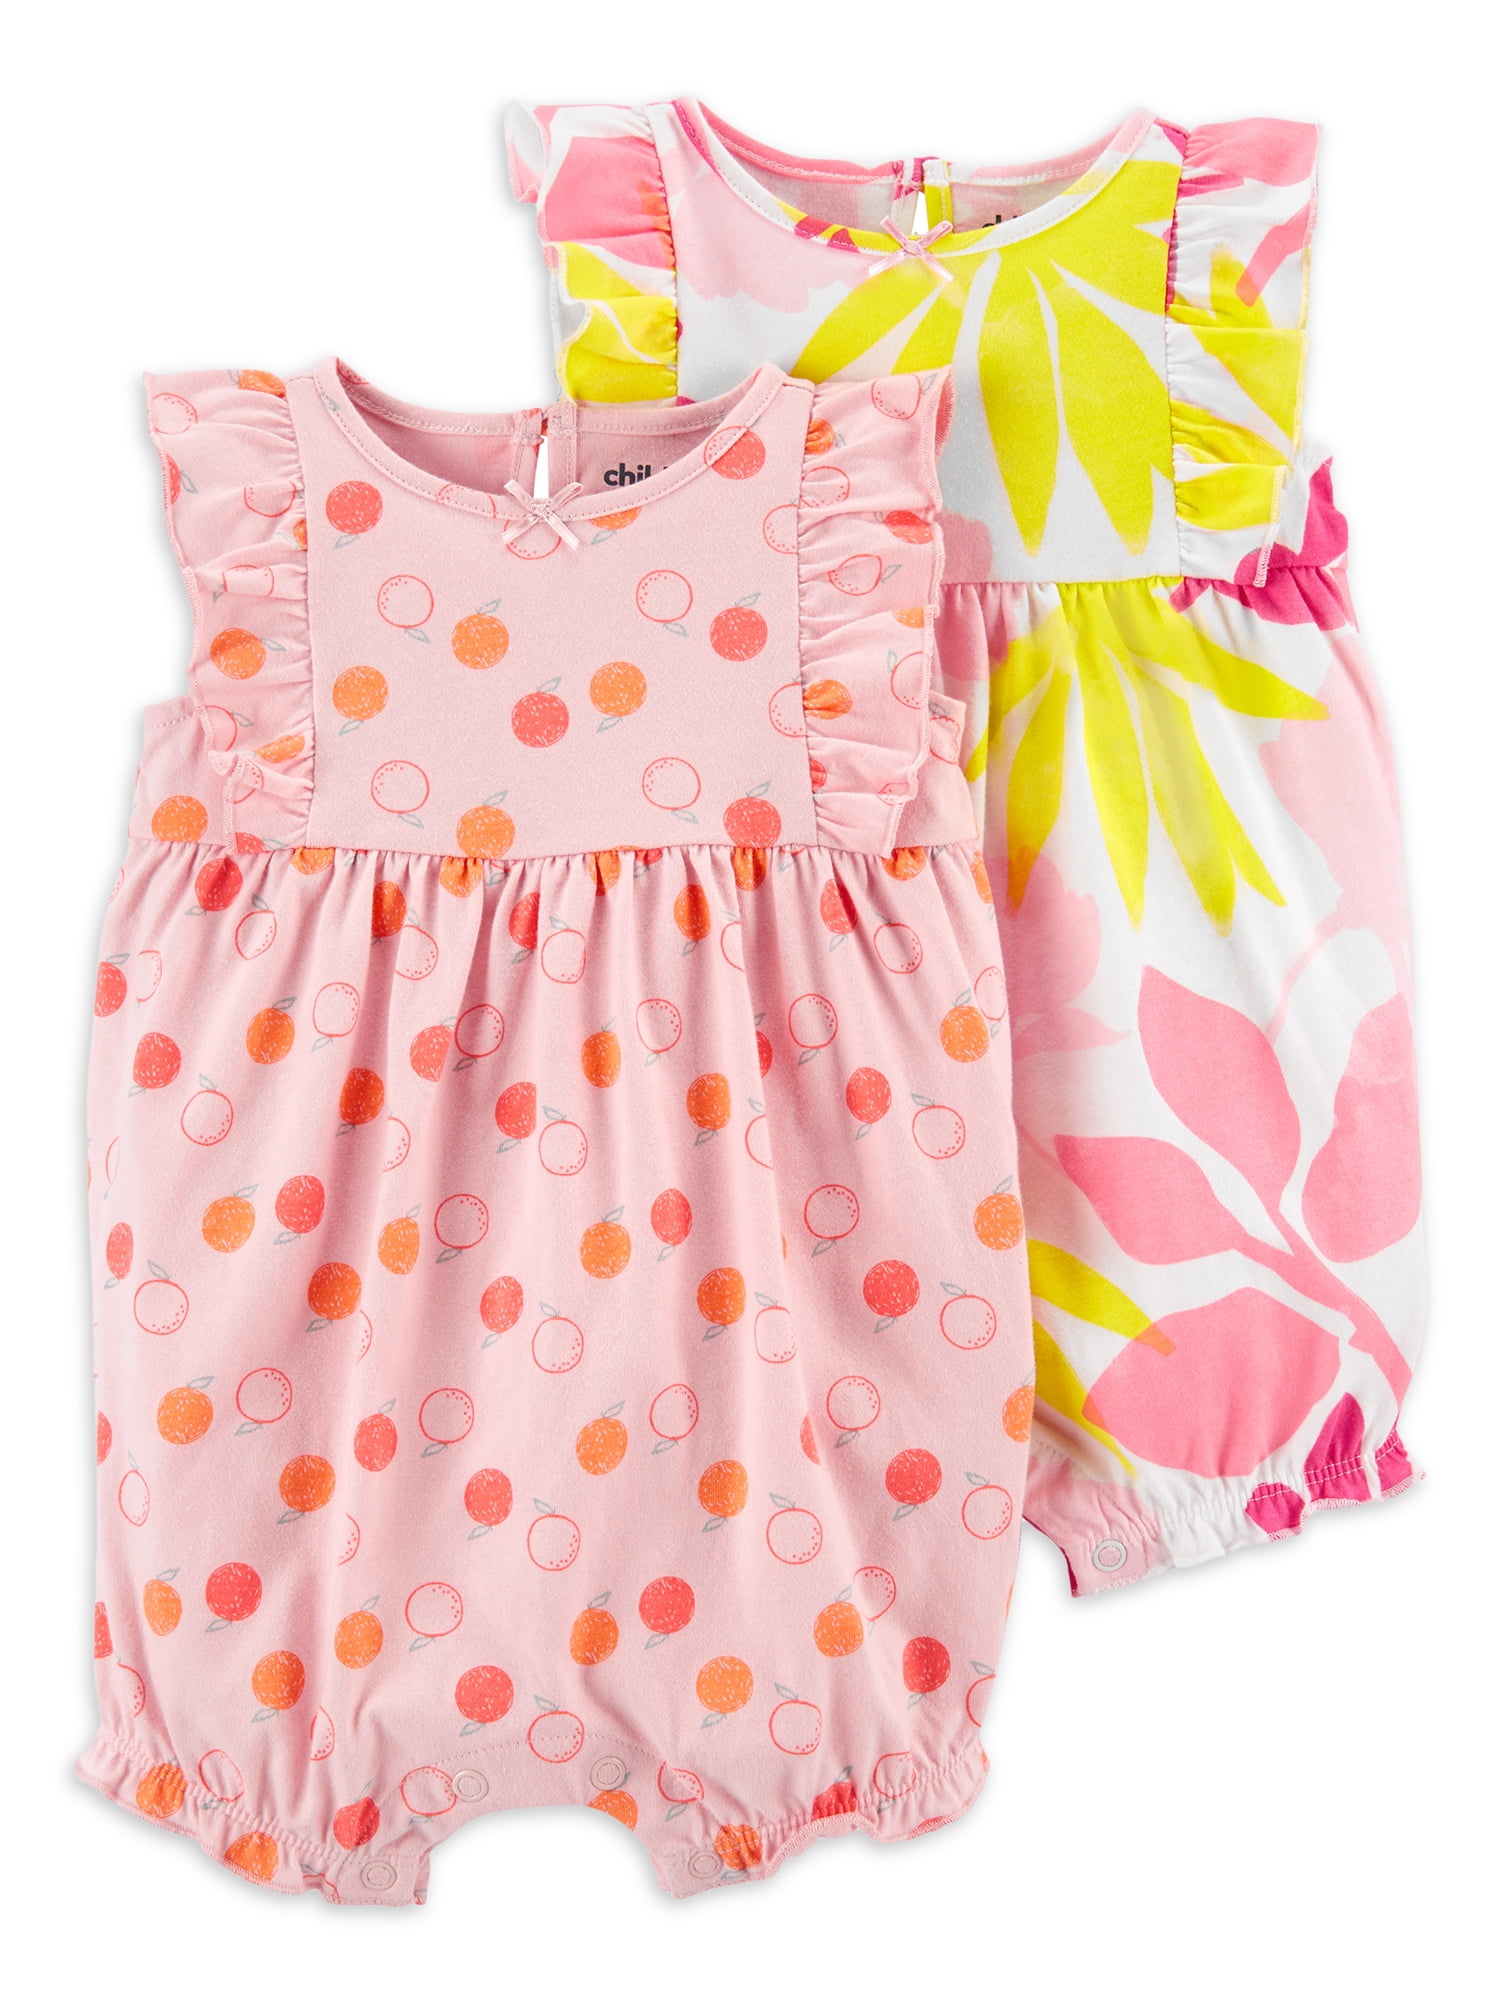 NWT Girls CARTERS Pink Yellow Summer Romper Size 6 Months 